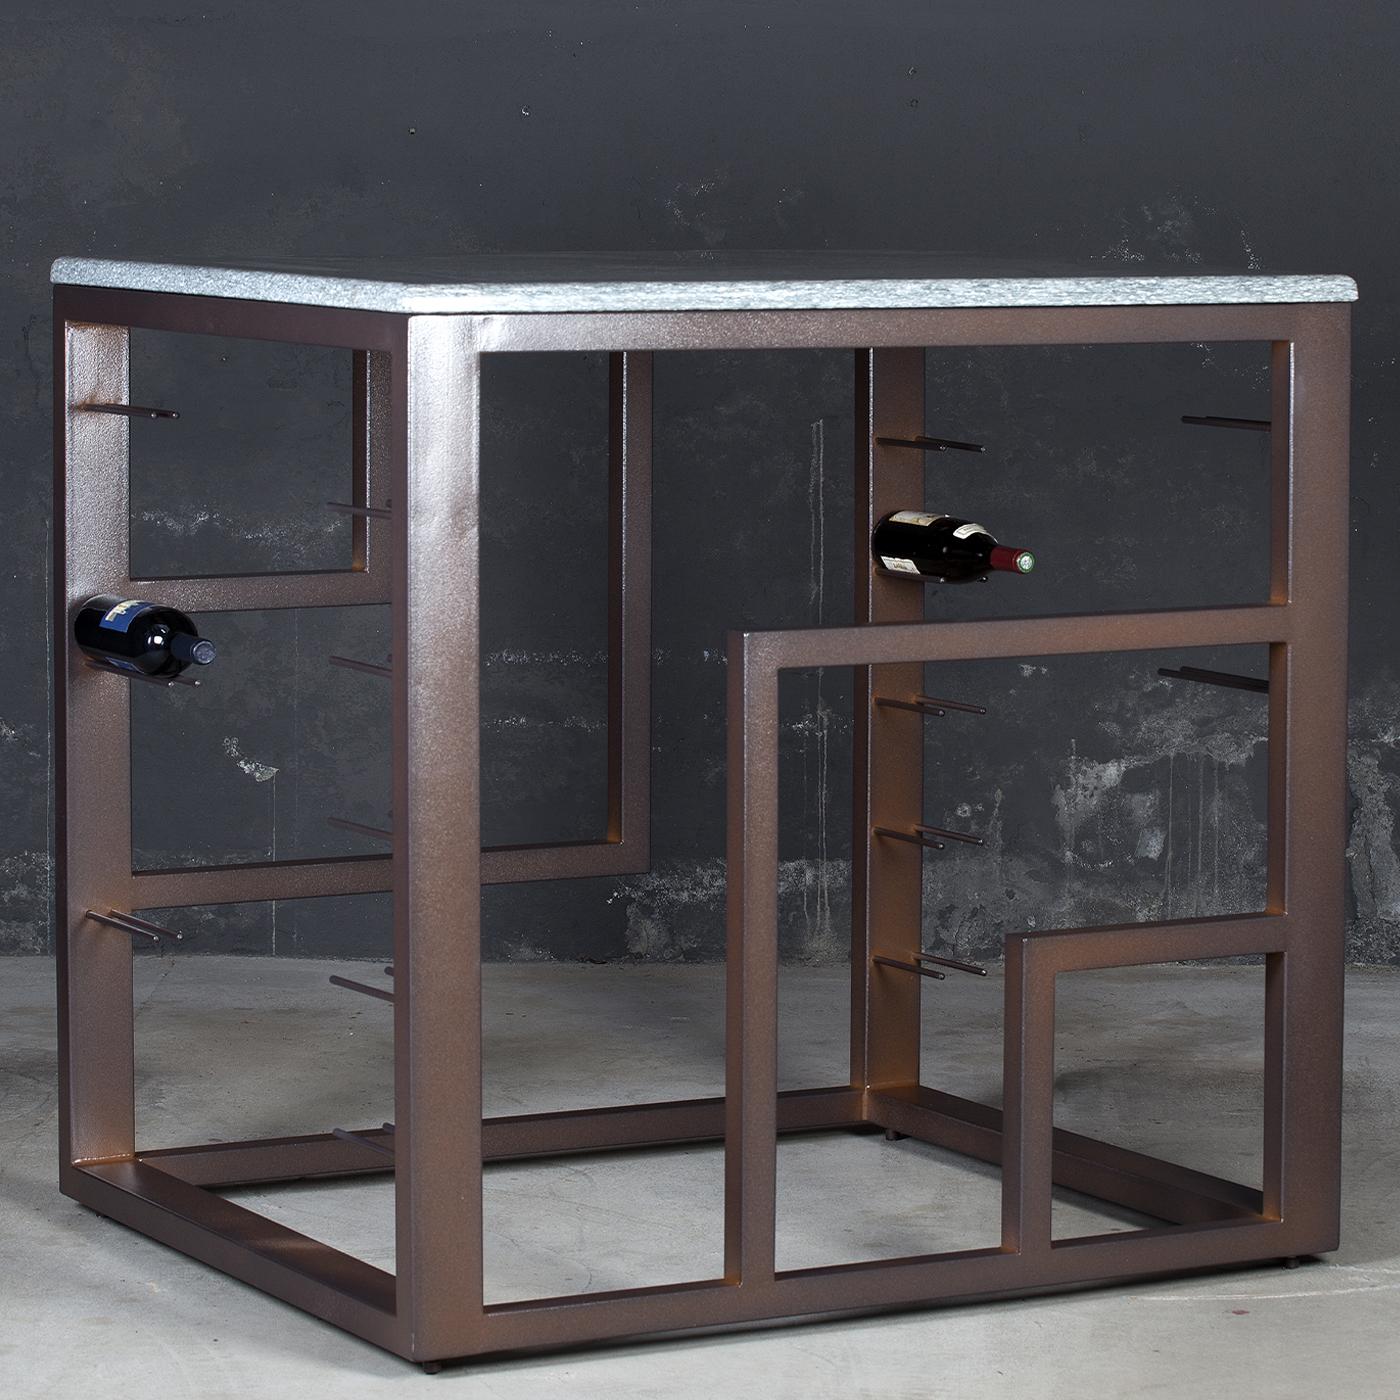 An exquisite design piece suitable for both indoor and outdoor use, this table and wine rack is entirely handmade of stainless steel. Hosting up to two sets of glasses and 10 bottles, it is sanded and lacquered with a rusty paint that adds to its